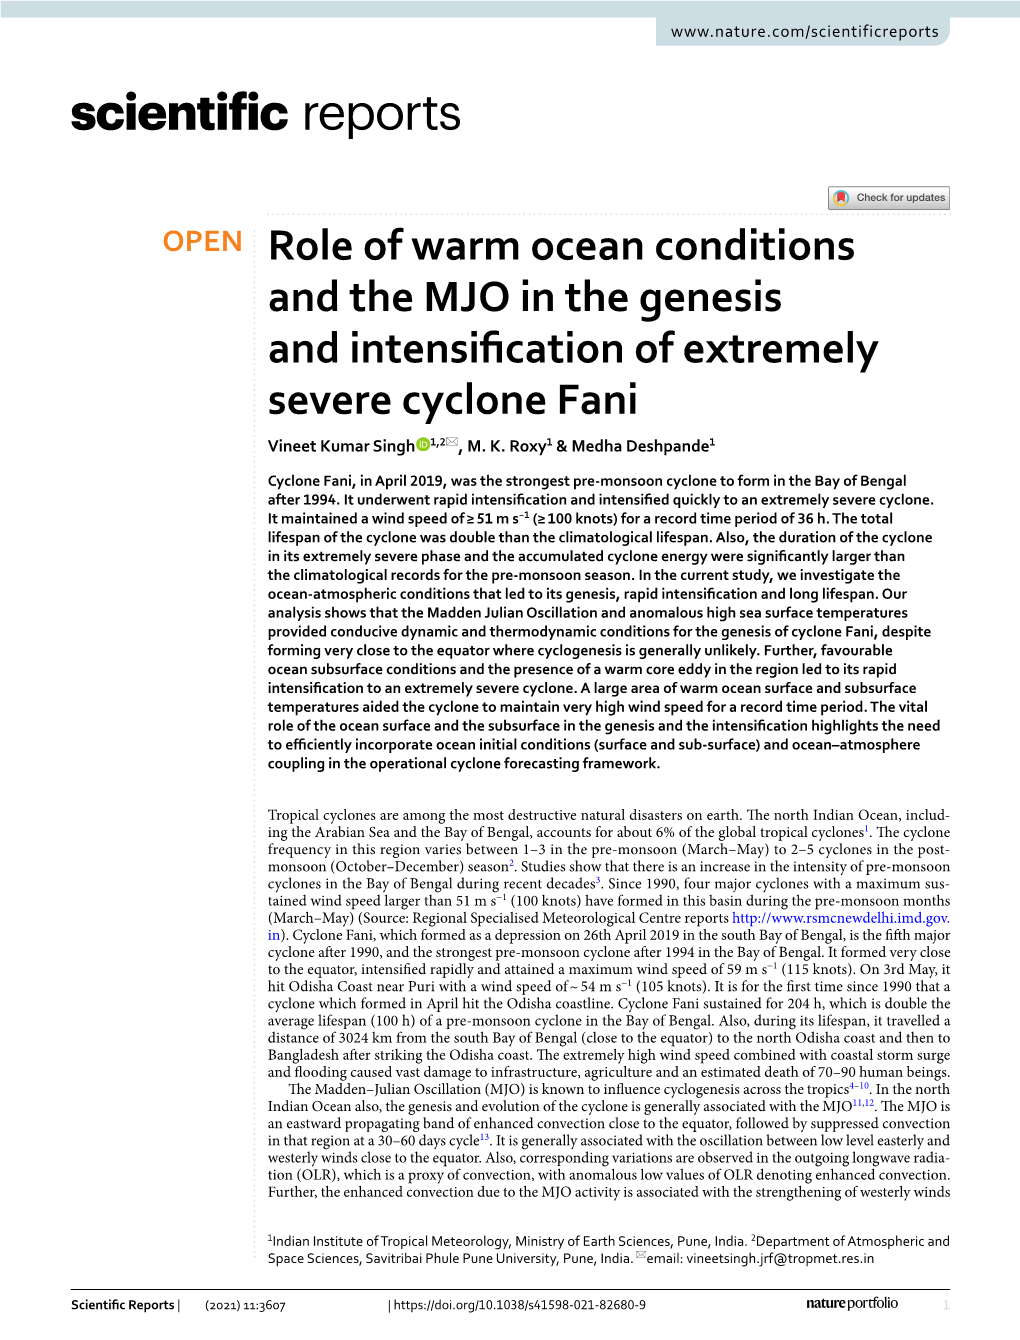 Role of Warm Ocean Conditions and the MJO in the Genesis and Intensification of Extremely Severe Cyclone Fani